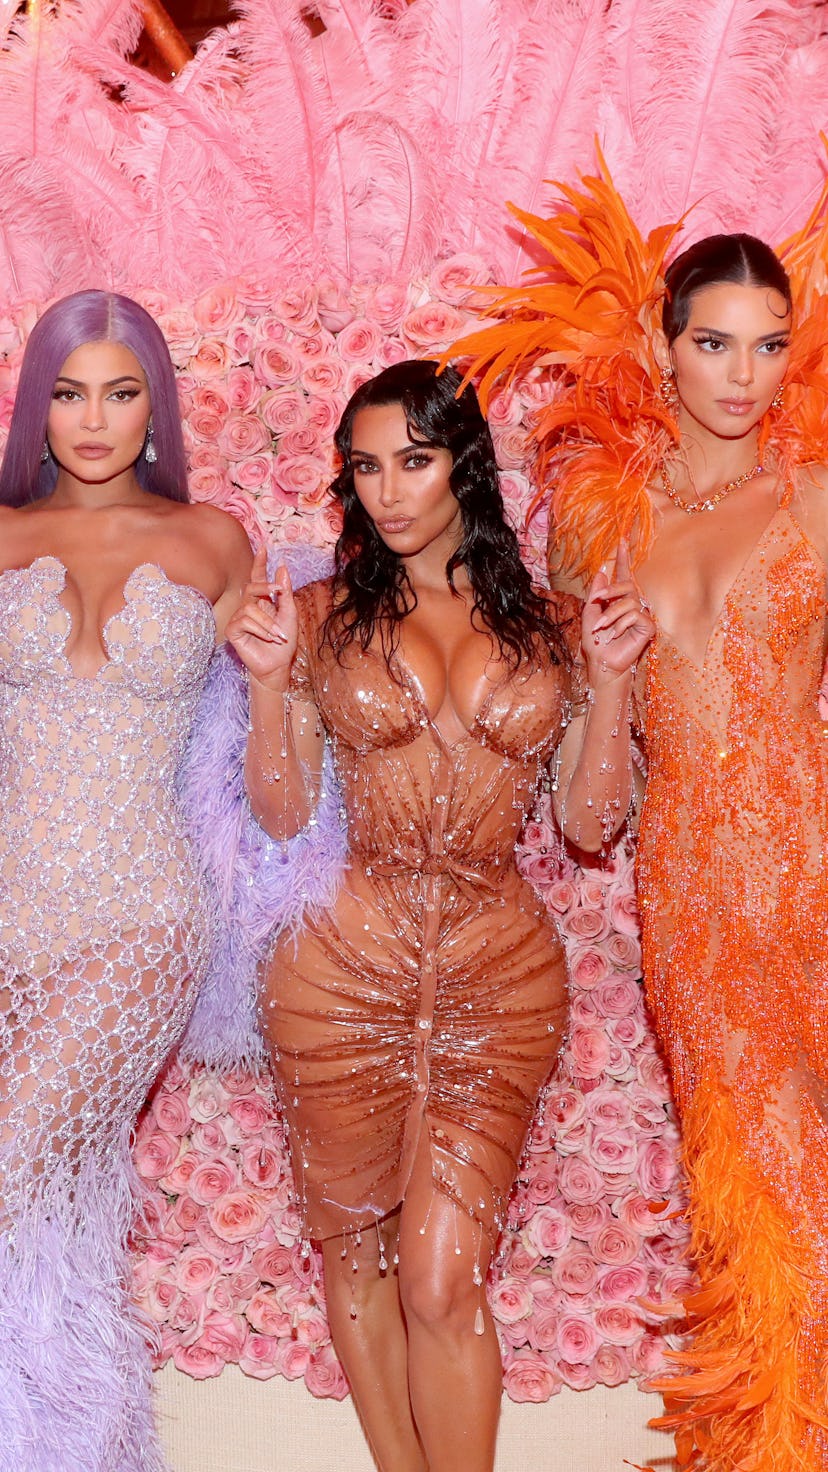 Kylie Jenner, Kim Kardashian West, and Kendall Jenner attend the 2019 Met Gala.